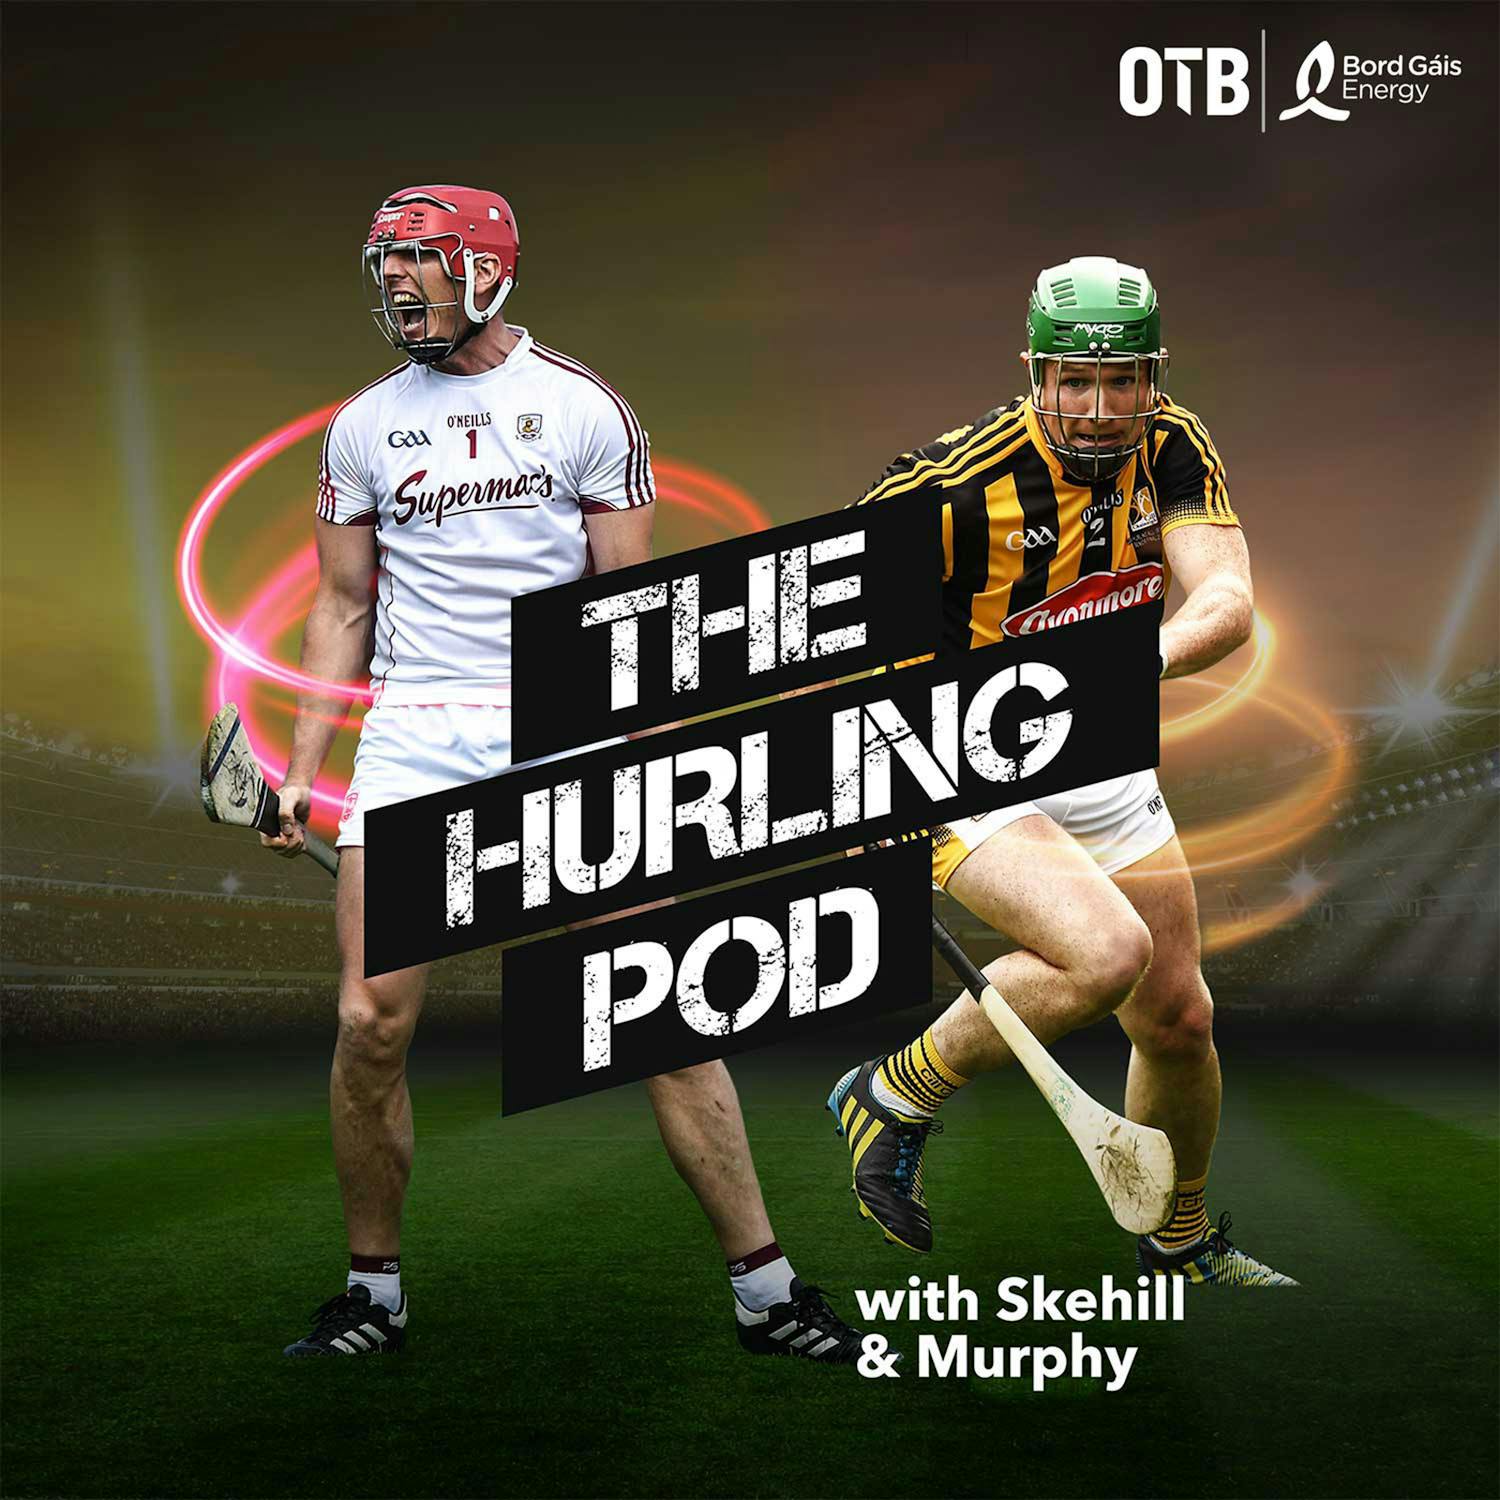 Kilkenny dethrone Limerick | Clare cruise past Tipp | Baffling calls and the PUC pigeon